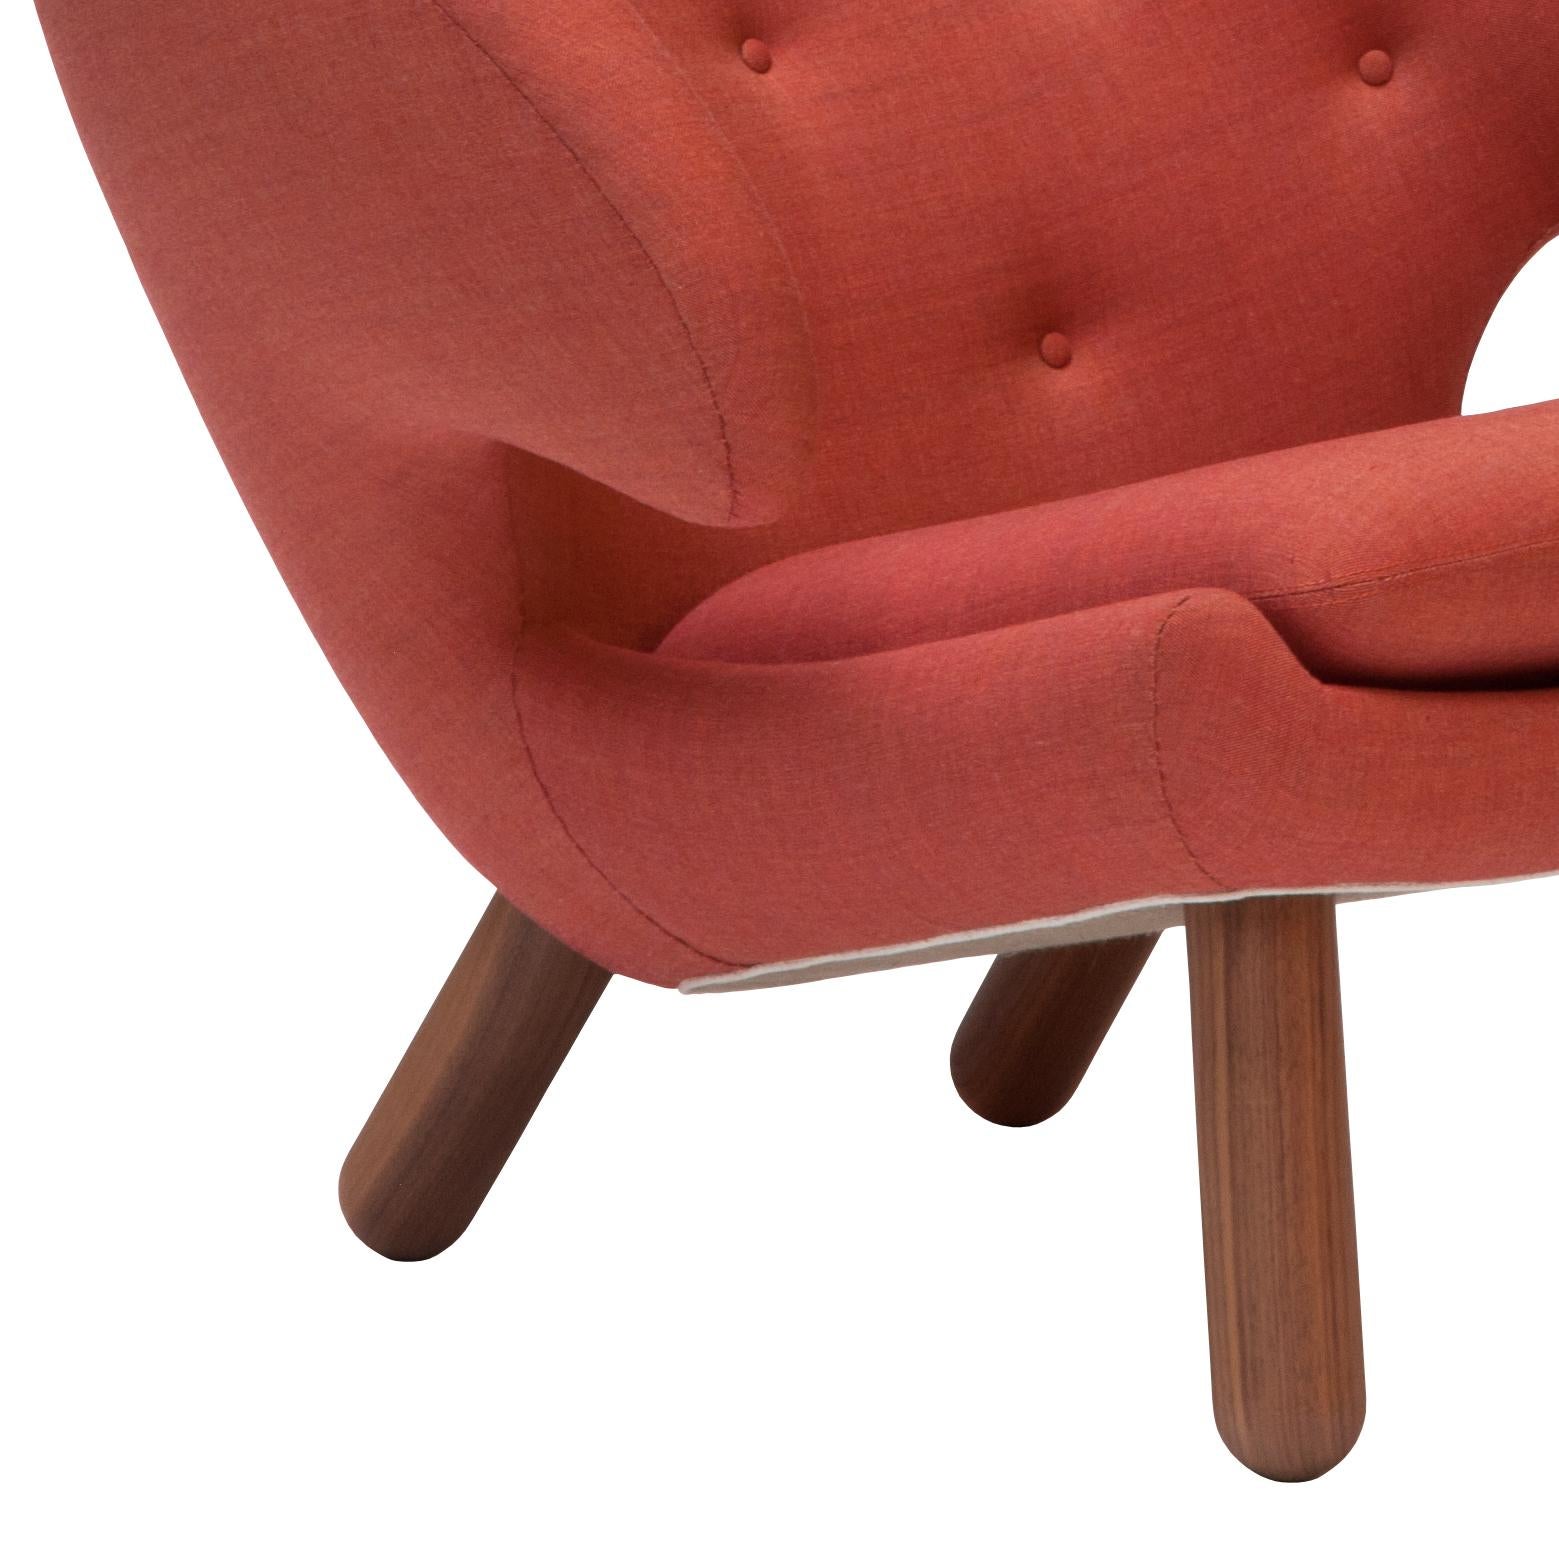 Set of Two Pelican Chairs Upholstered in Red Kvadrat Remix Fabric by Finn Juhl 1